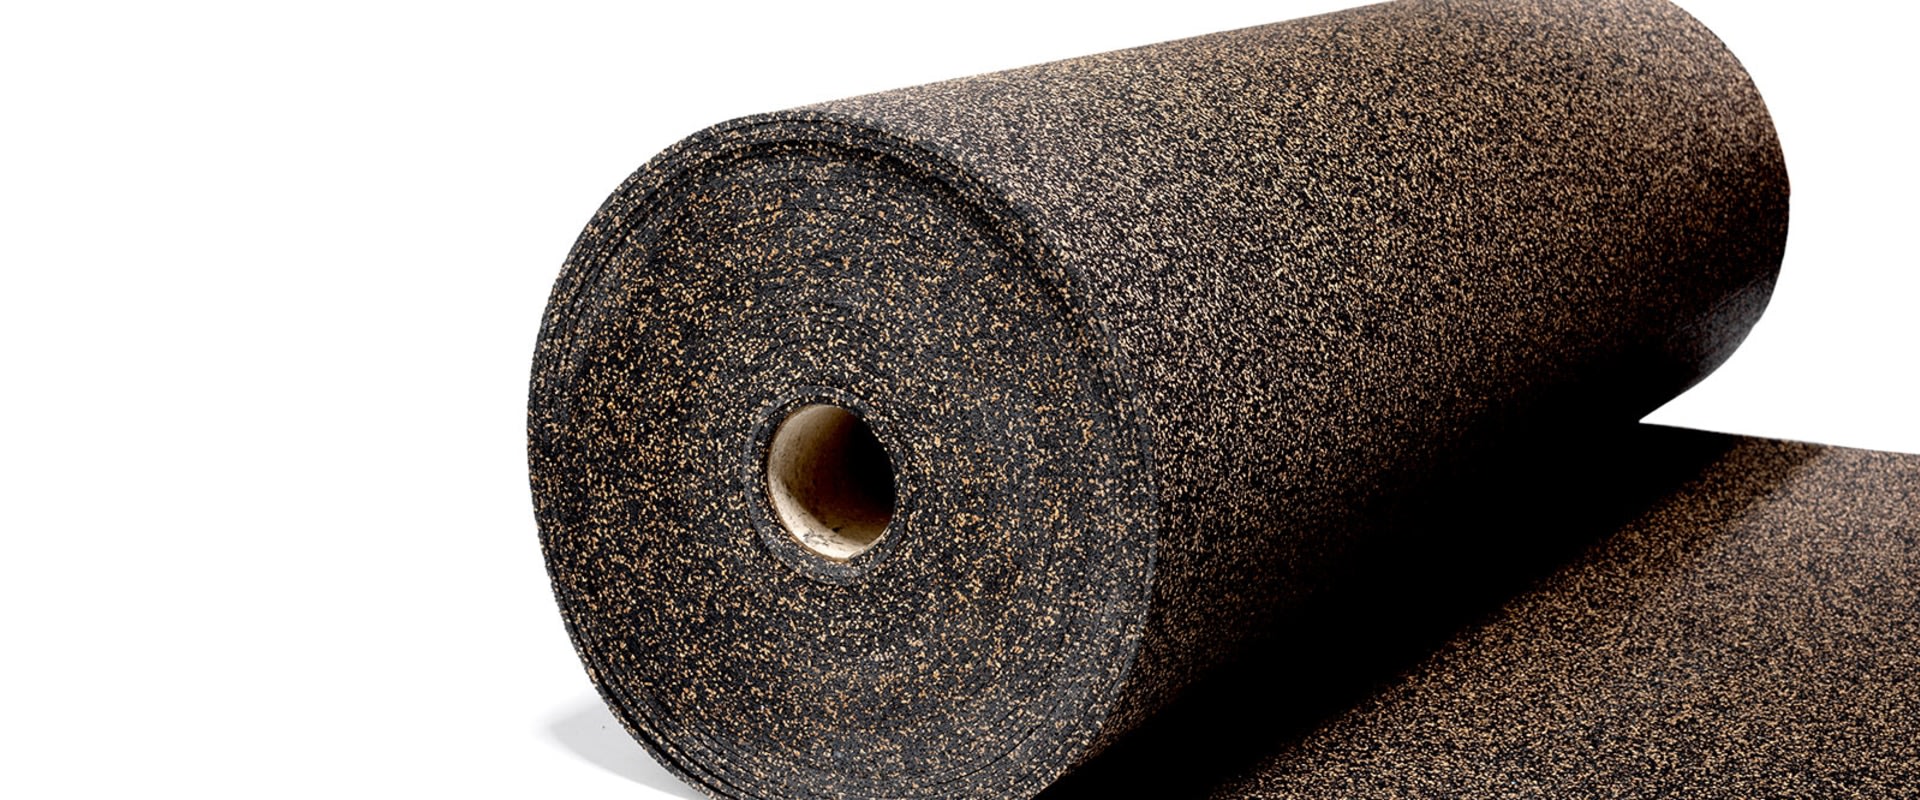 What is the best underlay for soundproofing uk?